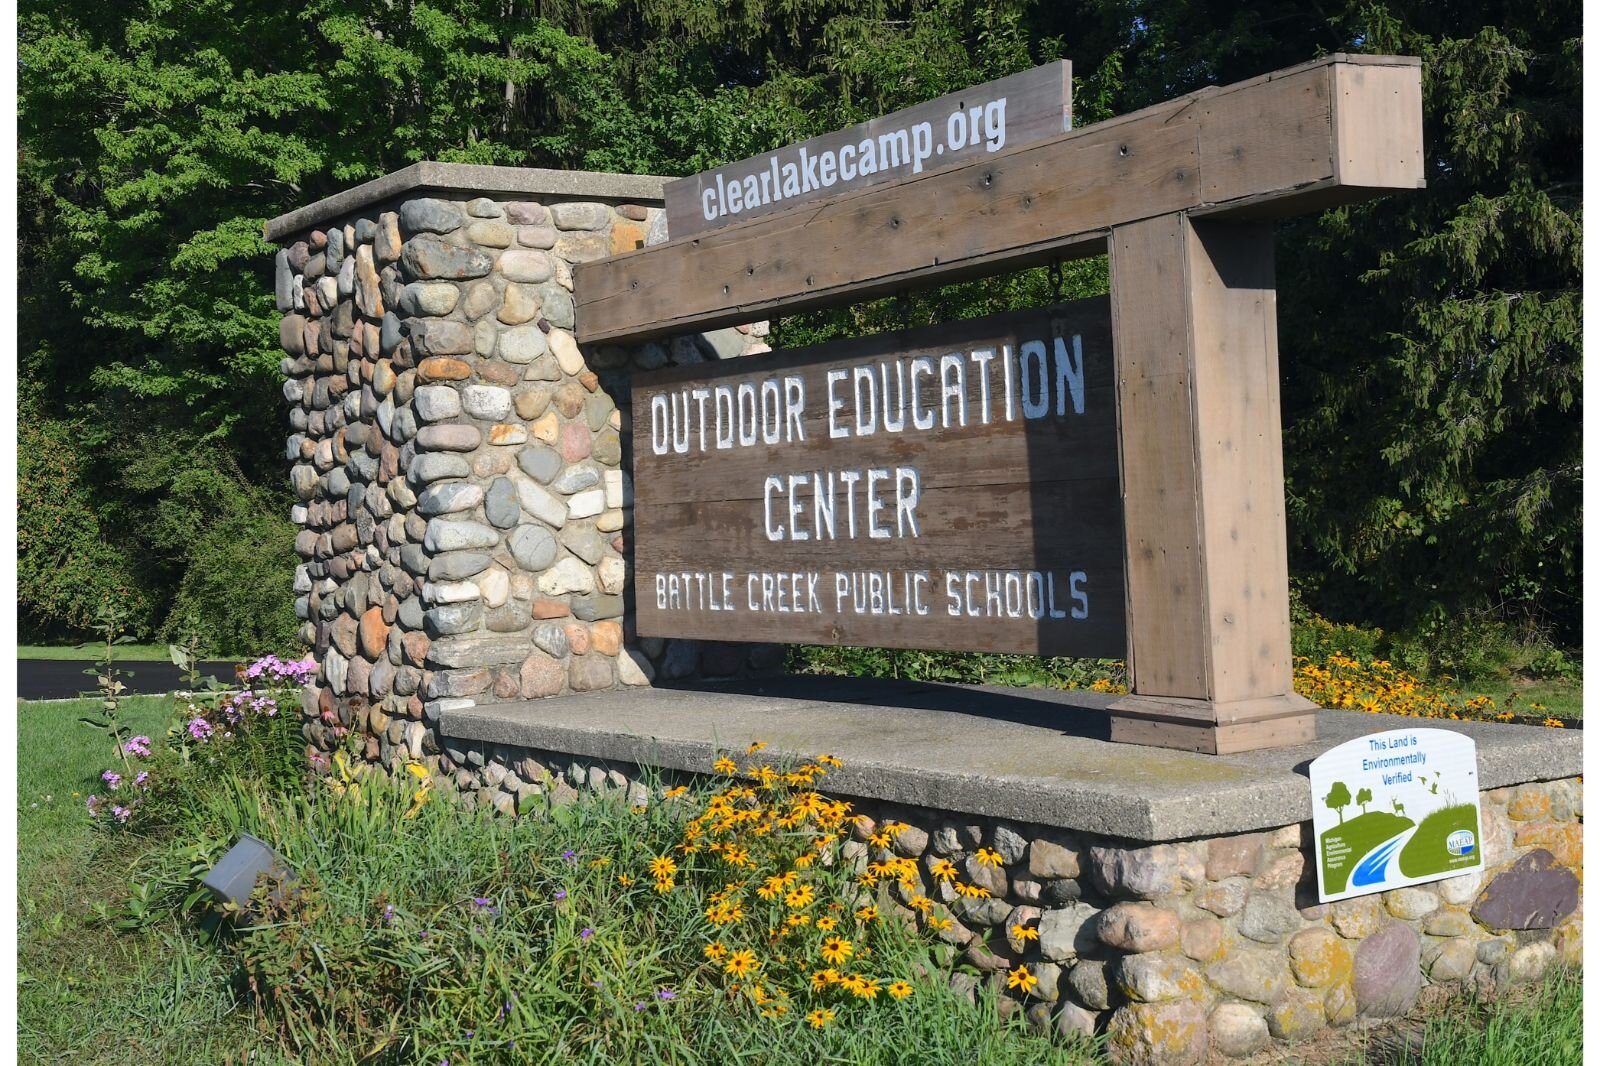 The Battle Creek Outdoor Education Center is located at Clear Lake Camp in Barry County.